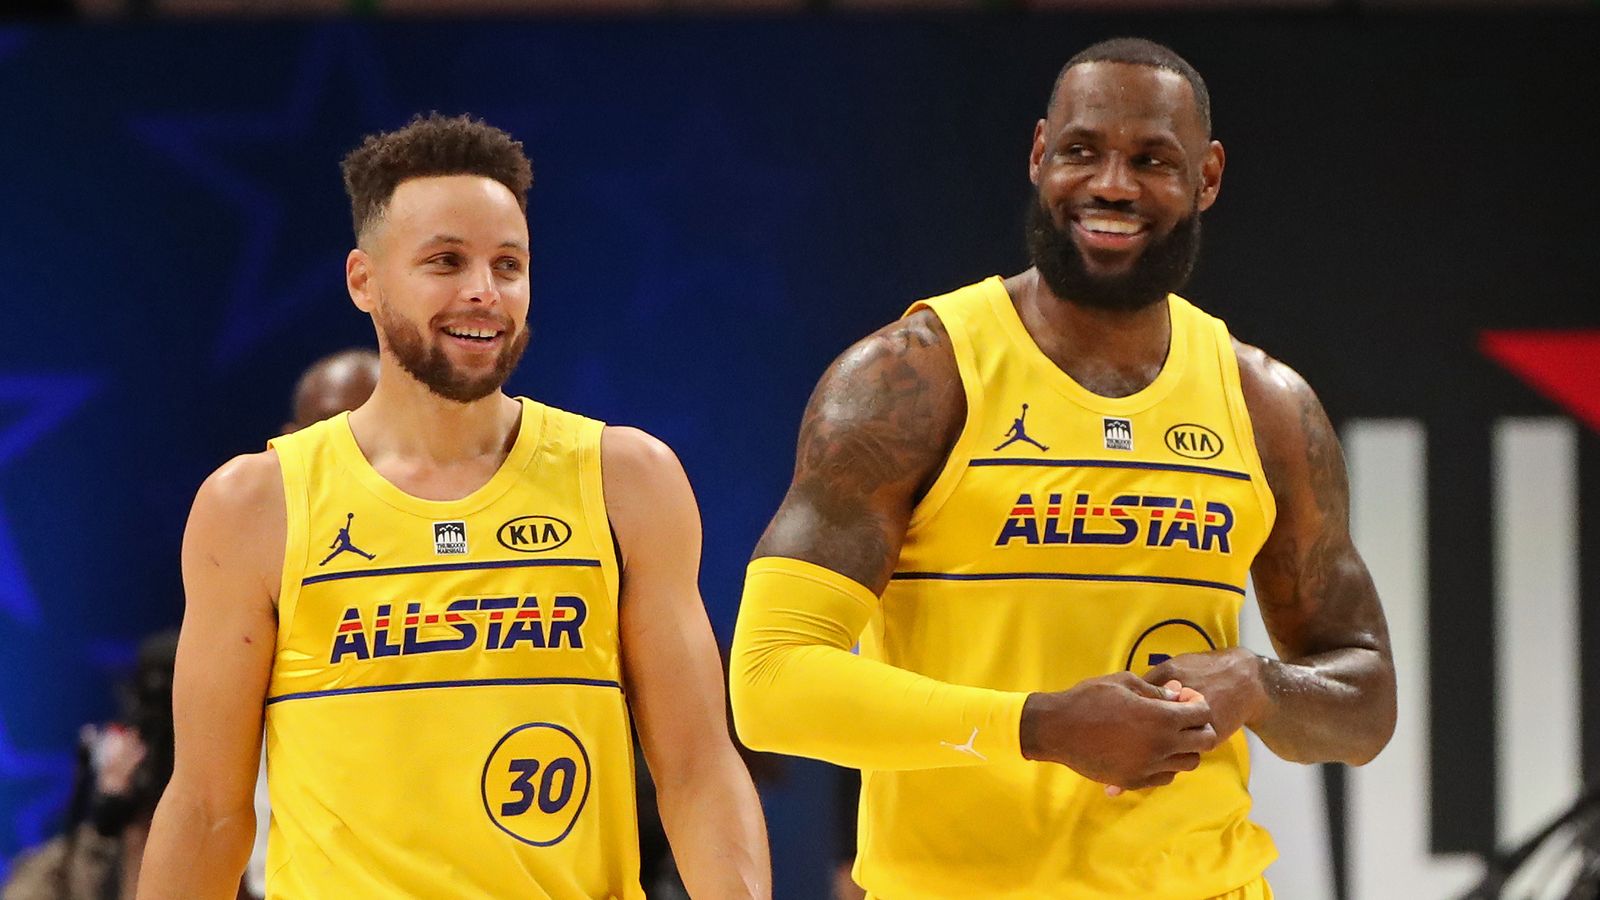 LeBron vs. Steph Curry: Who has the most valuable game-worn jersey? -  Sports Collectors Digest